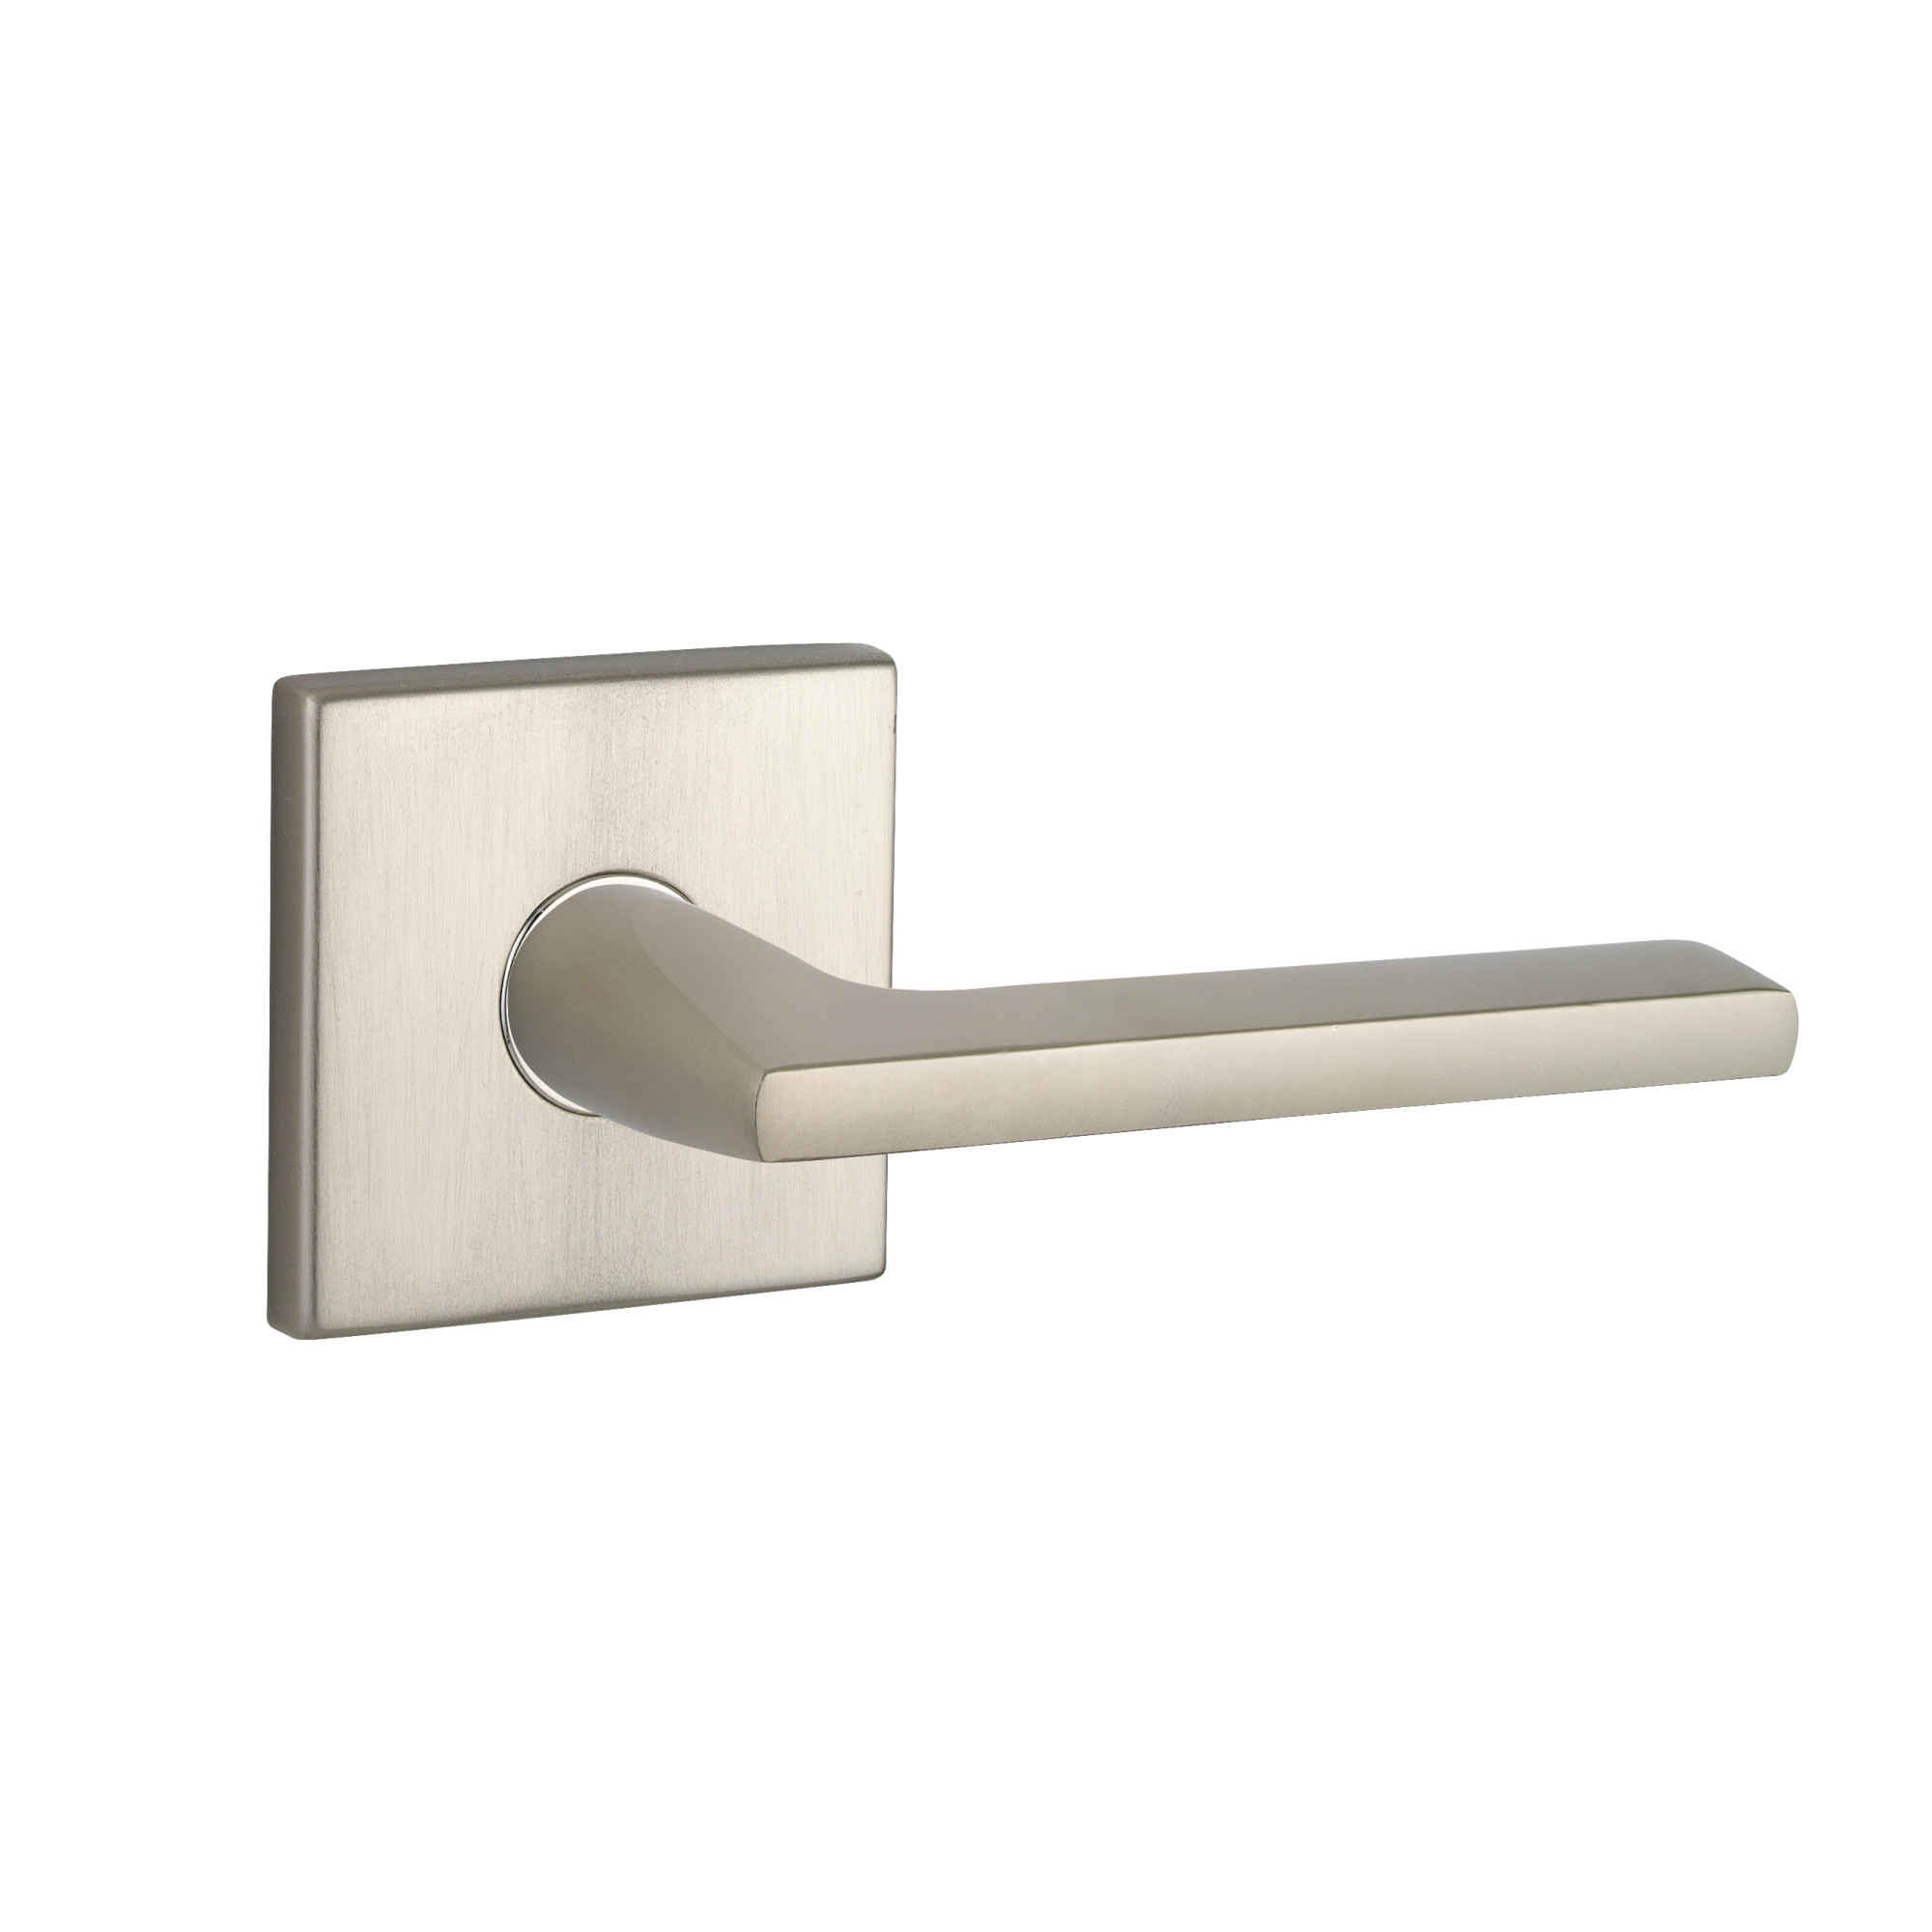 Baldwin 5162.Rdm 5162 Right Handed Non-Turning One-Sided Dummy Door Lever - Nickel - image 1 of 6